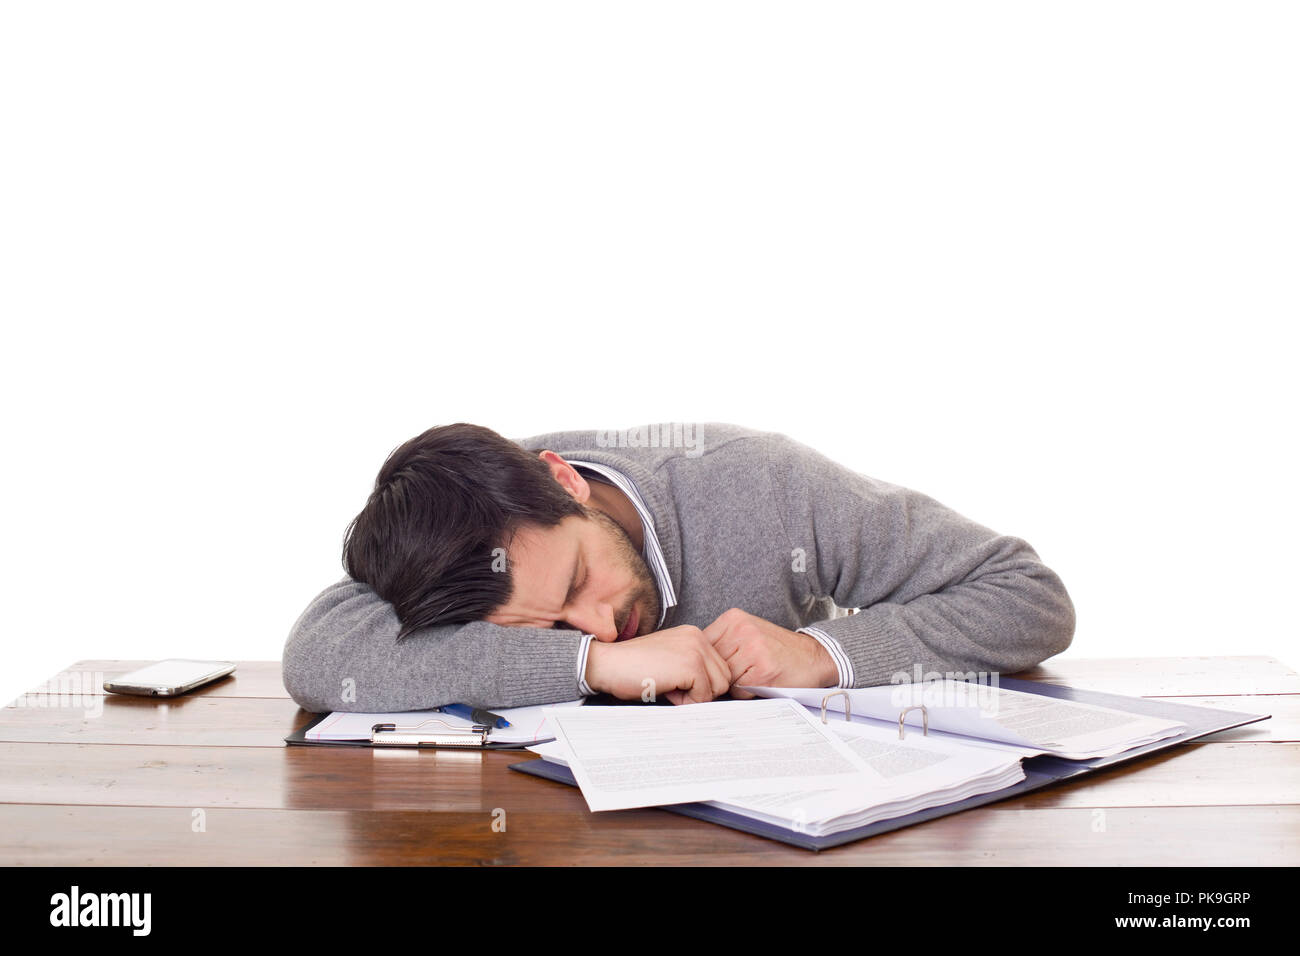 Casual Man Sleeping On A Desk Isolated On White Background Stock